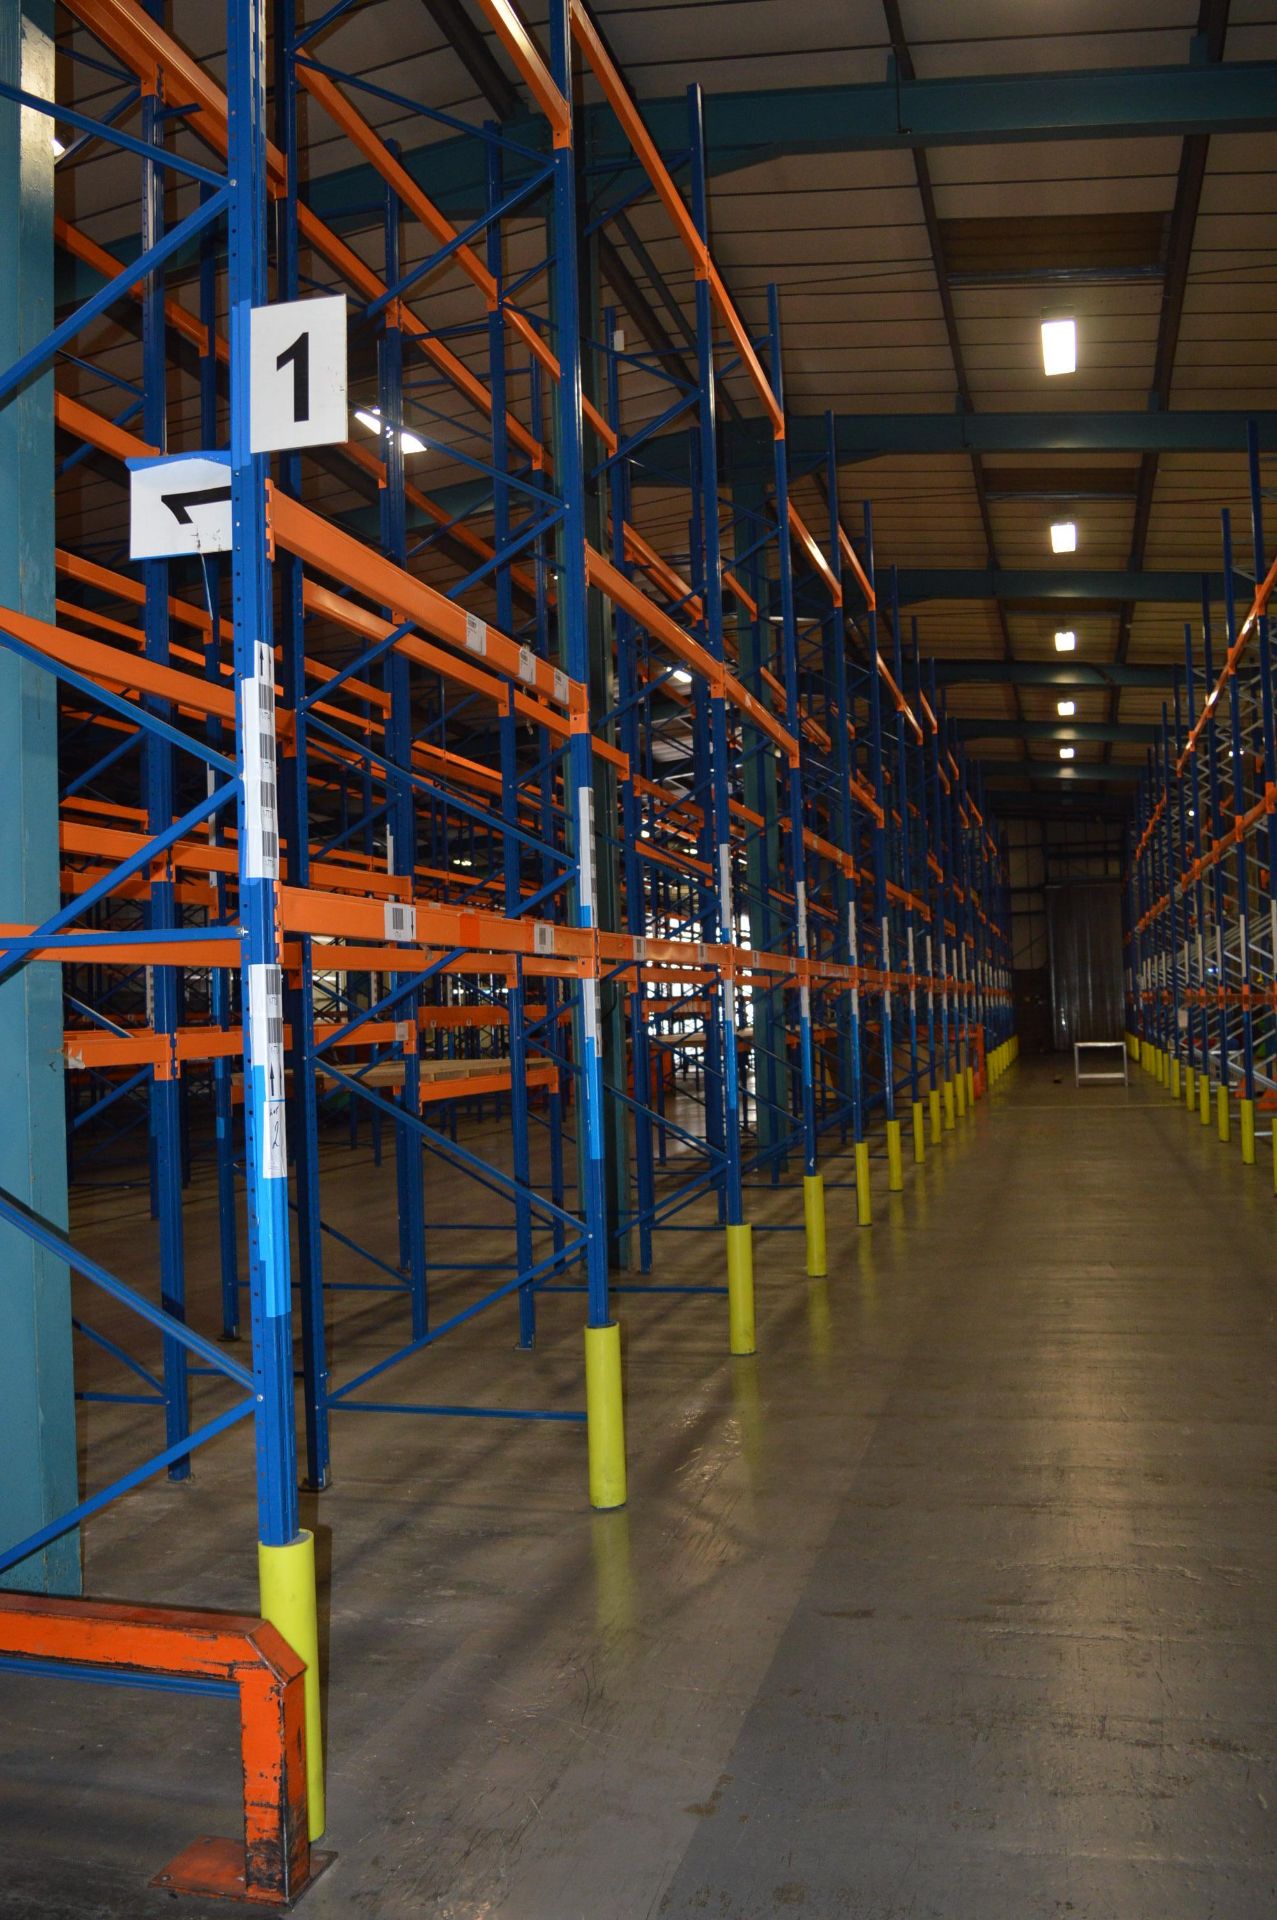 *Eleven Bays of Pallet Racking (2.2m wide, 1.1m deep, 6m high) Comprising of Eleven Uprights and